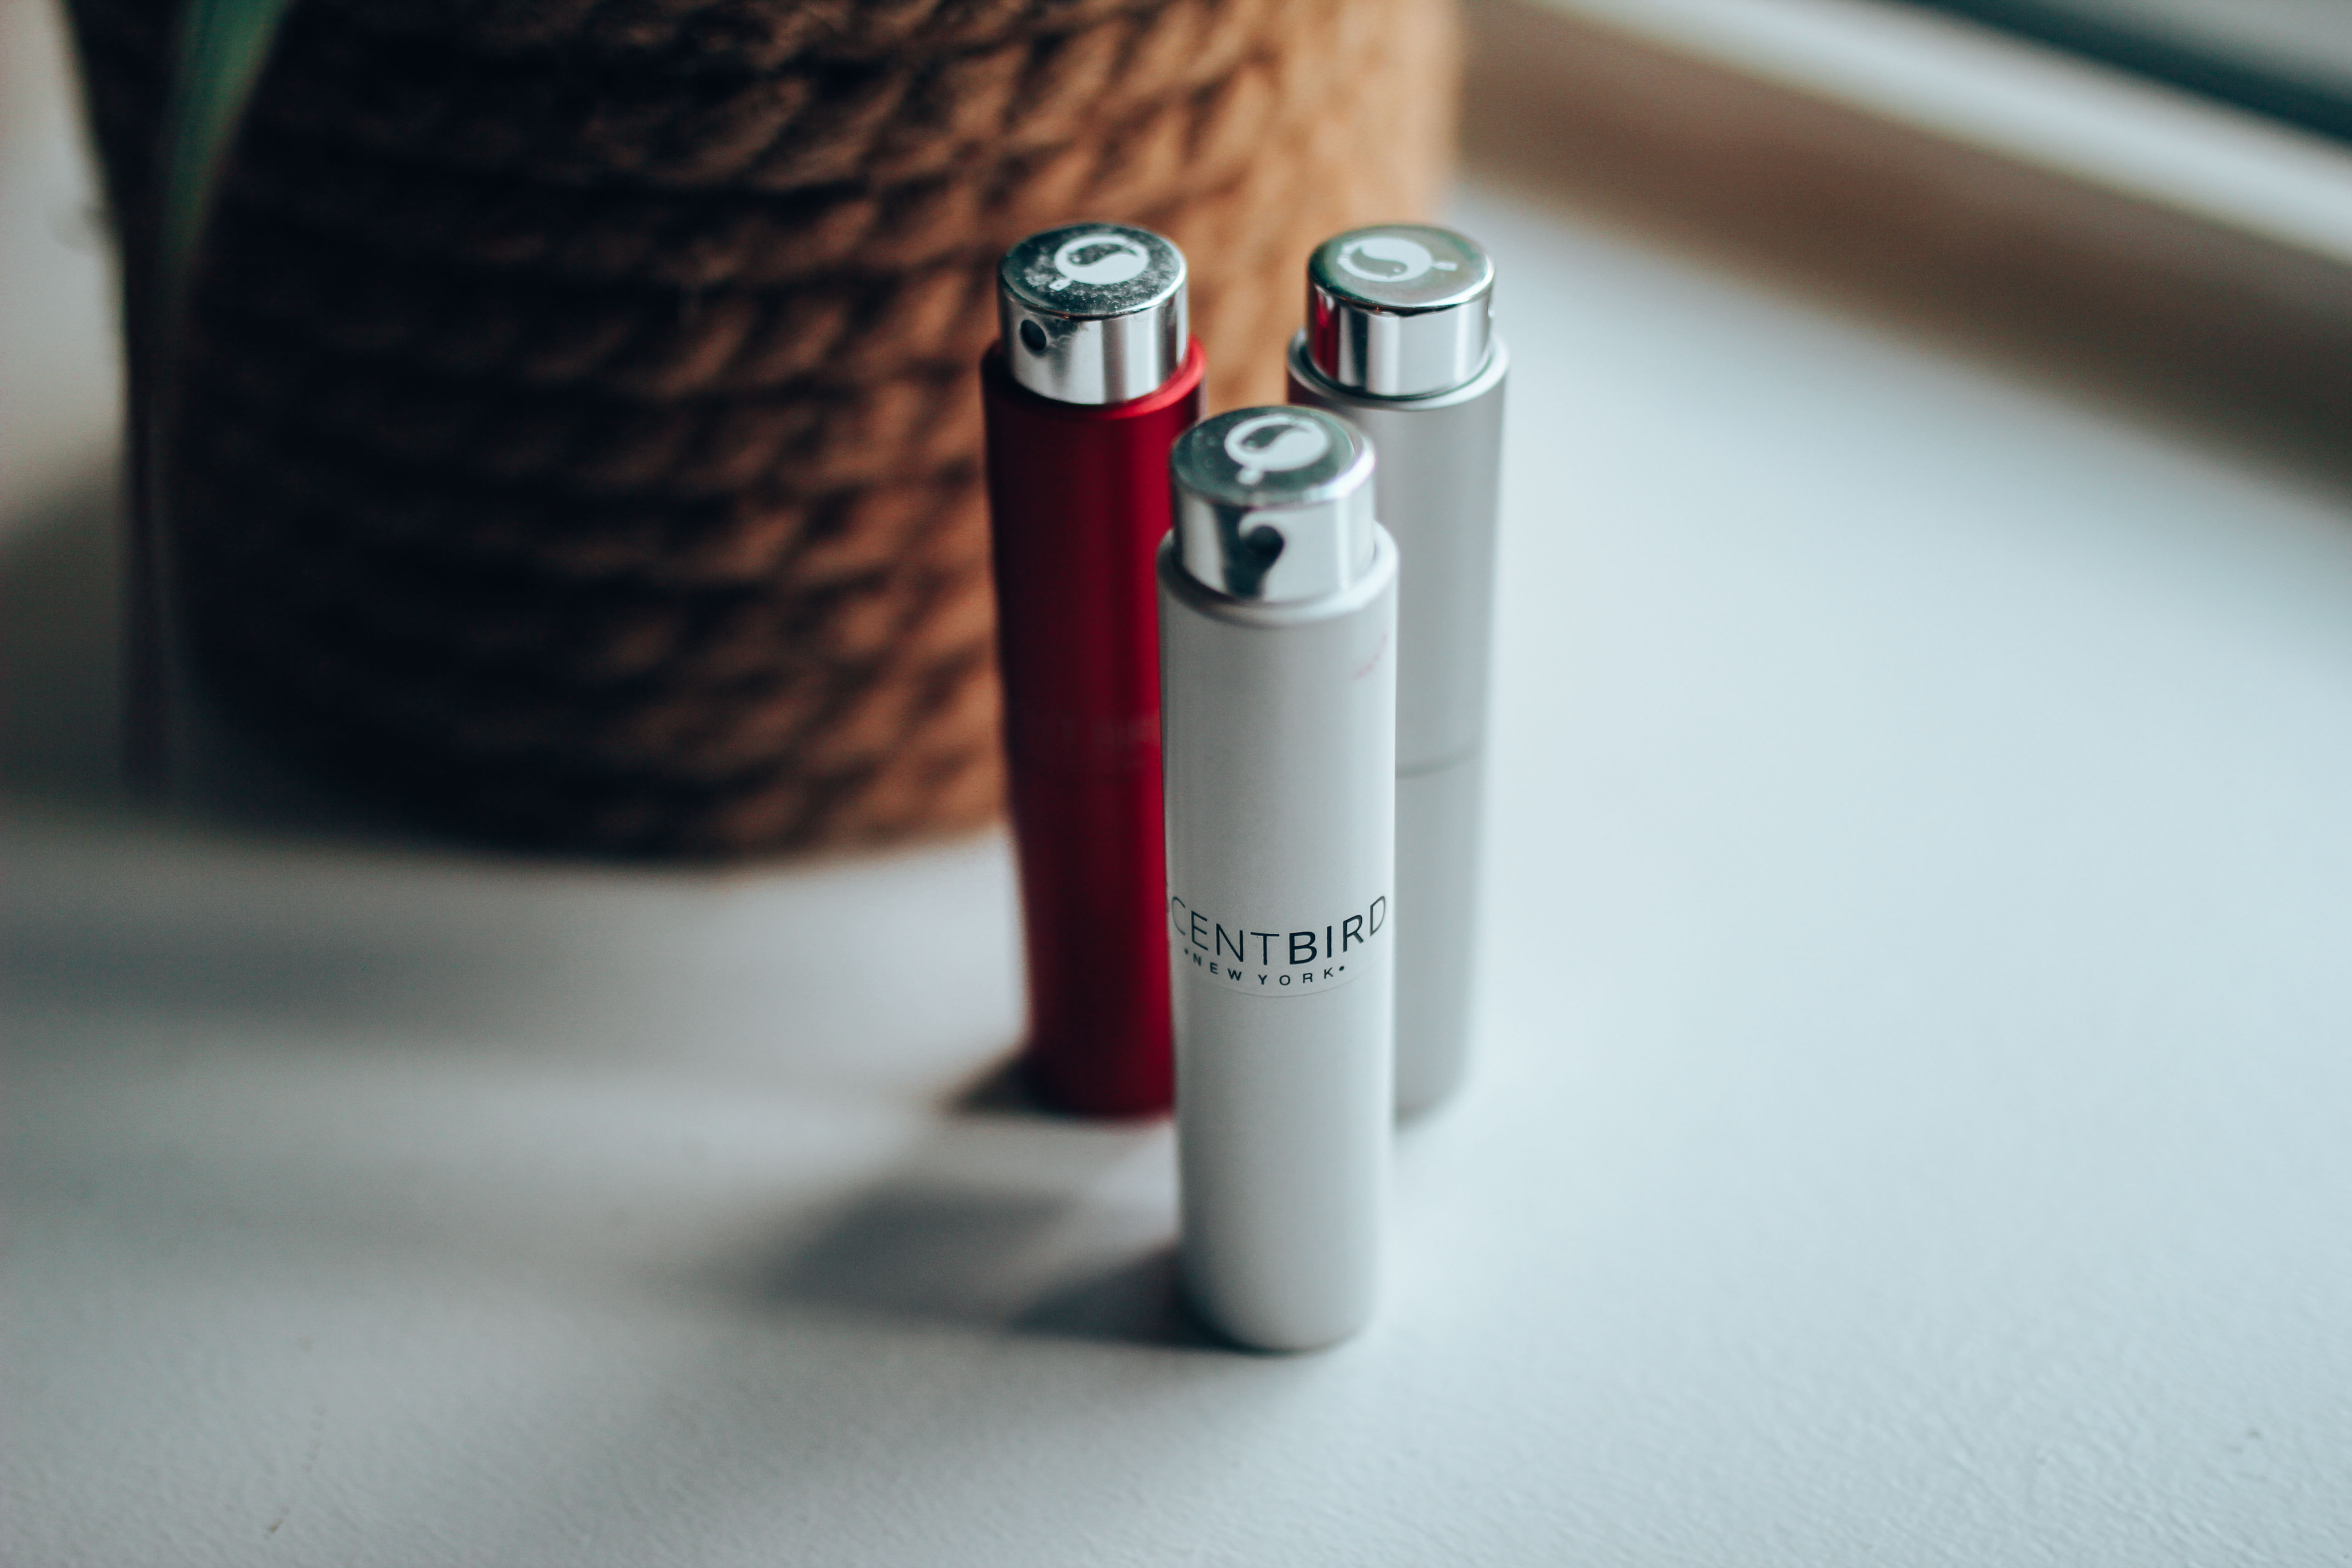 three scentbird cases from top